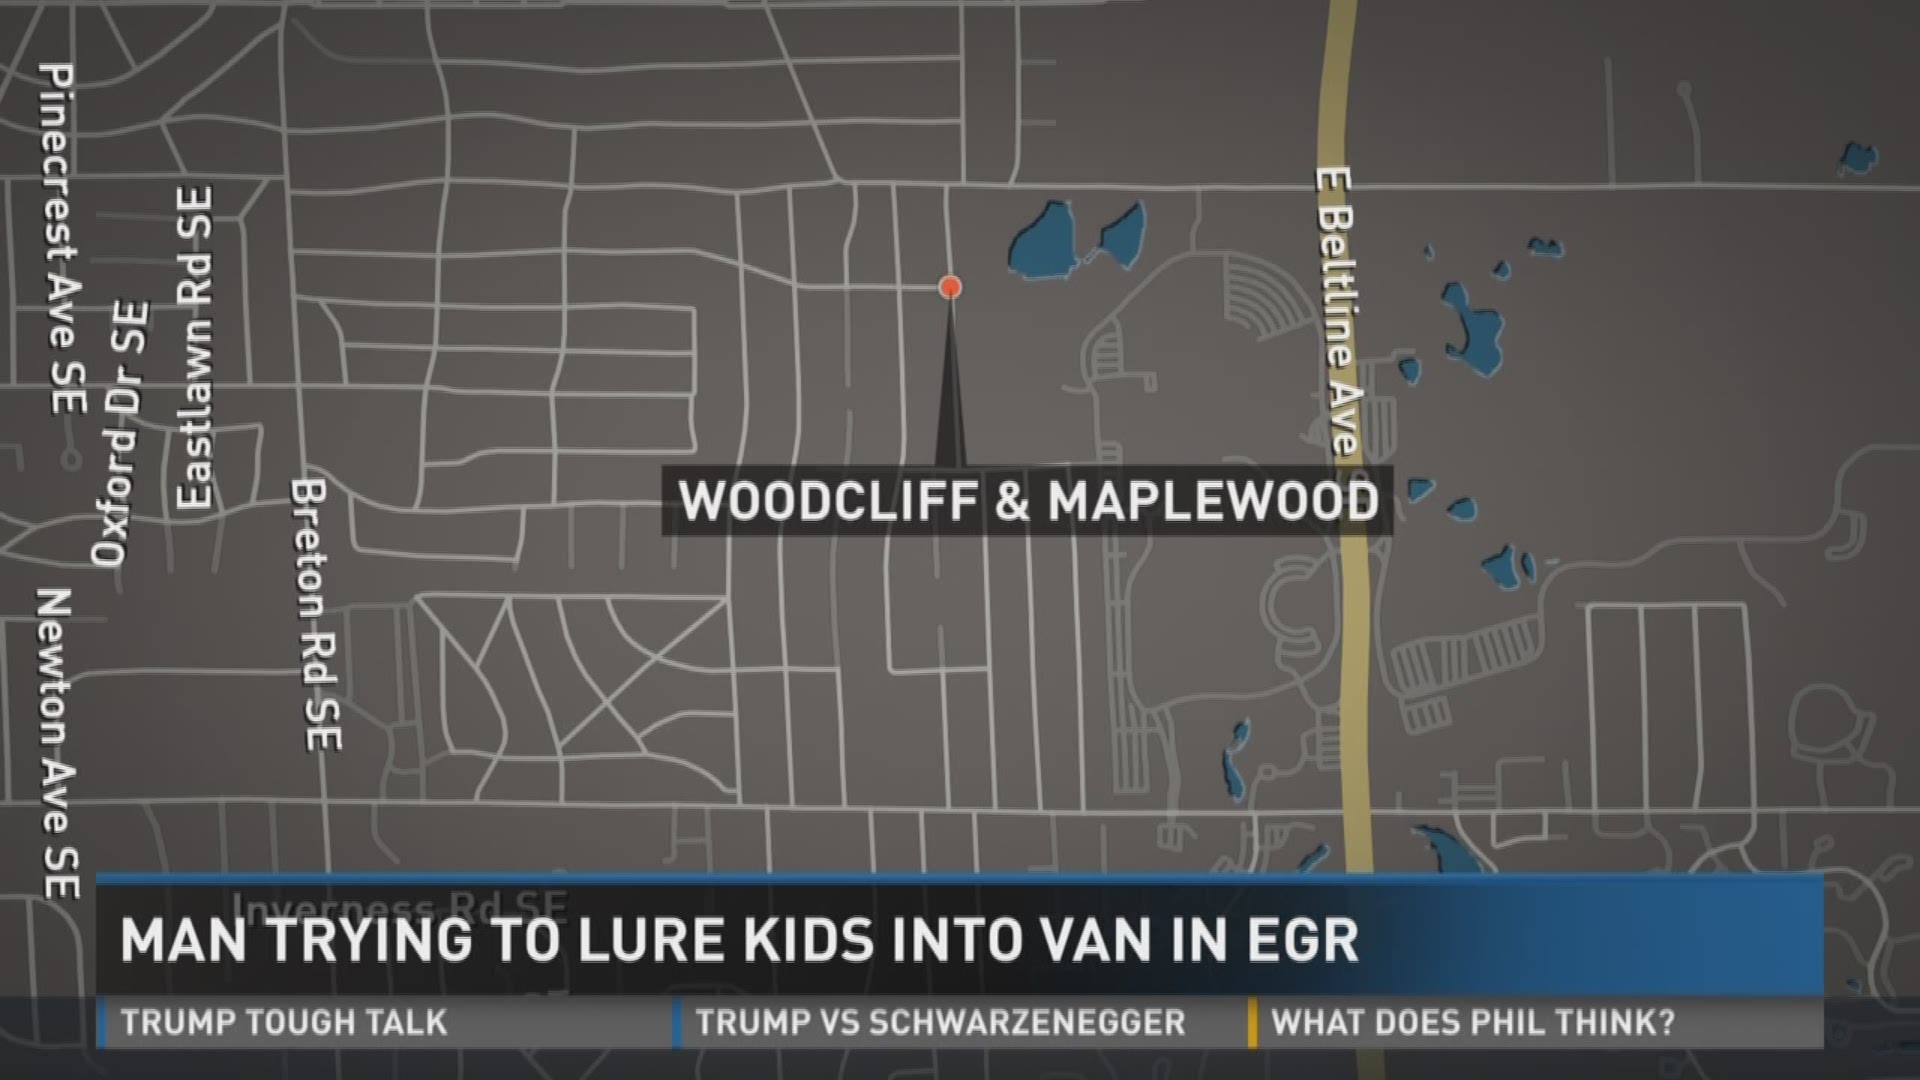 Man trying to lure kids into van in EGR